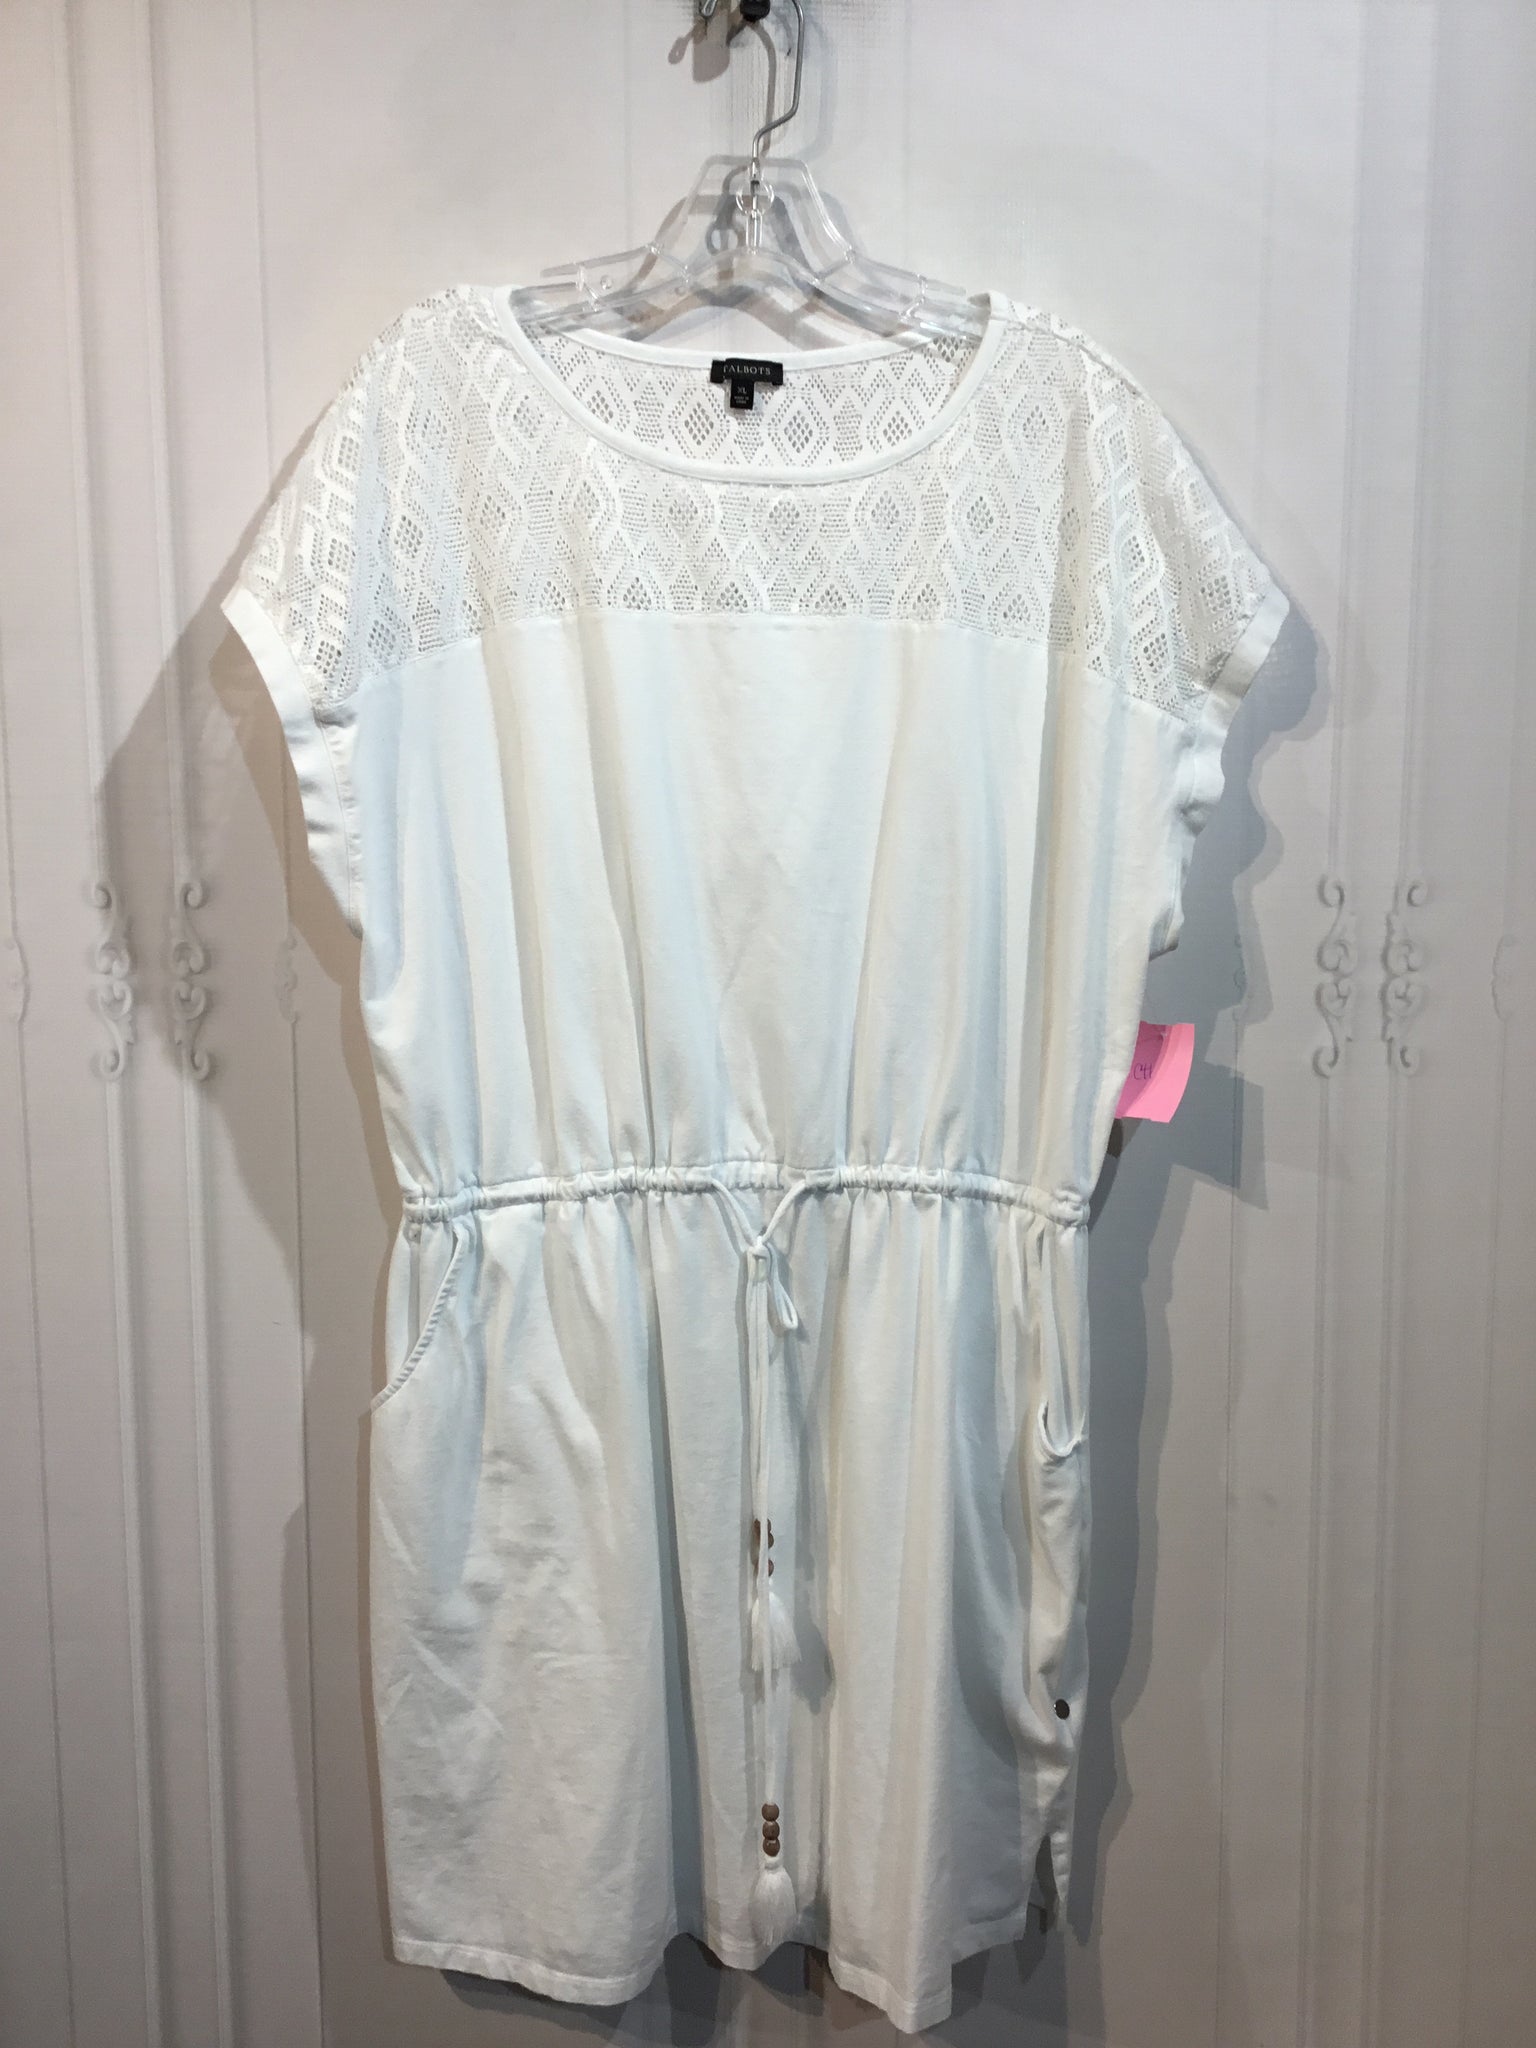 Talbots Size XL/16-18 White Cover Up